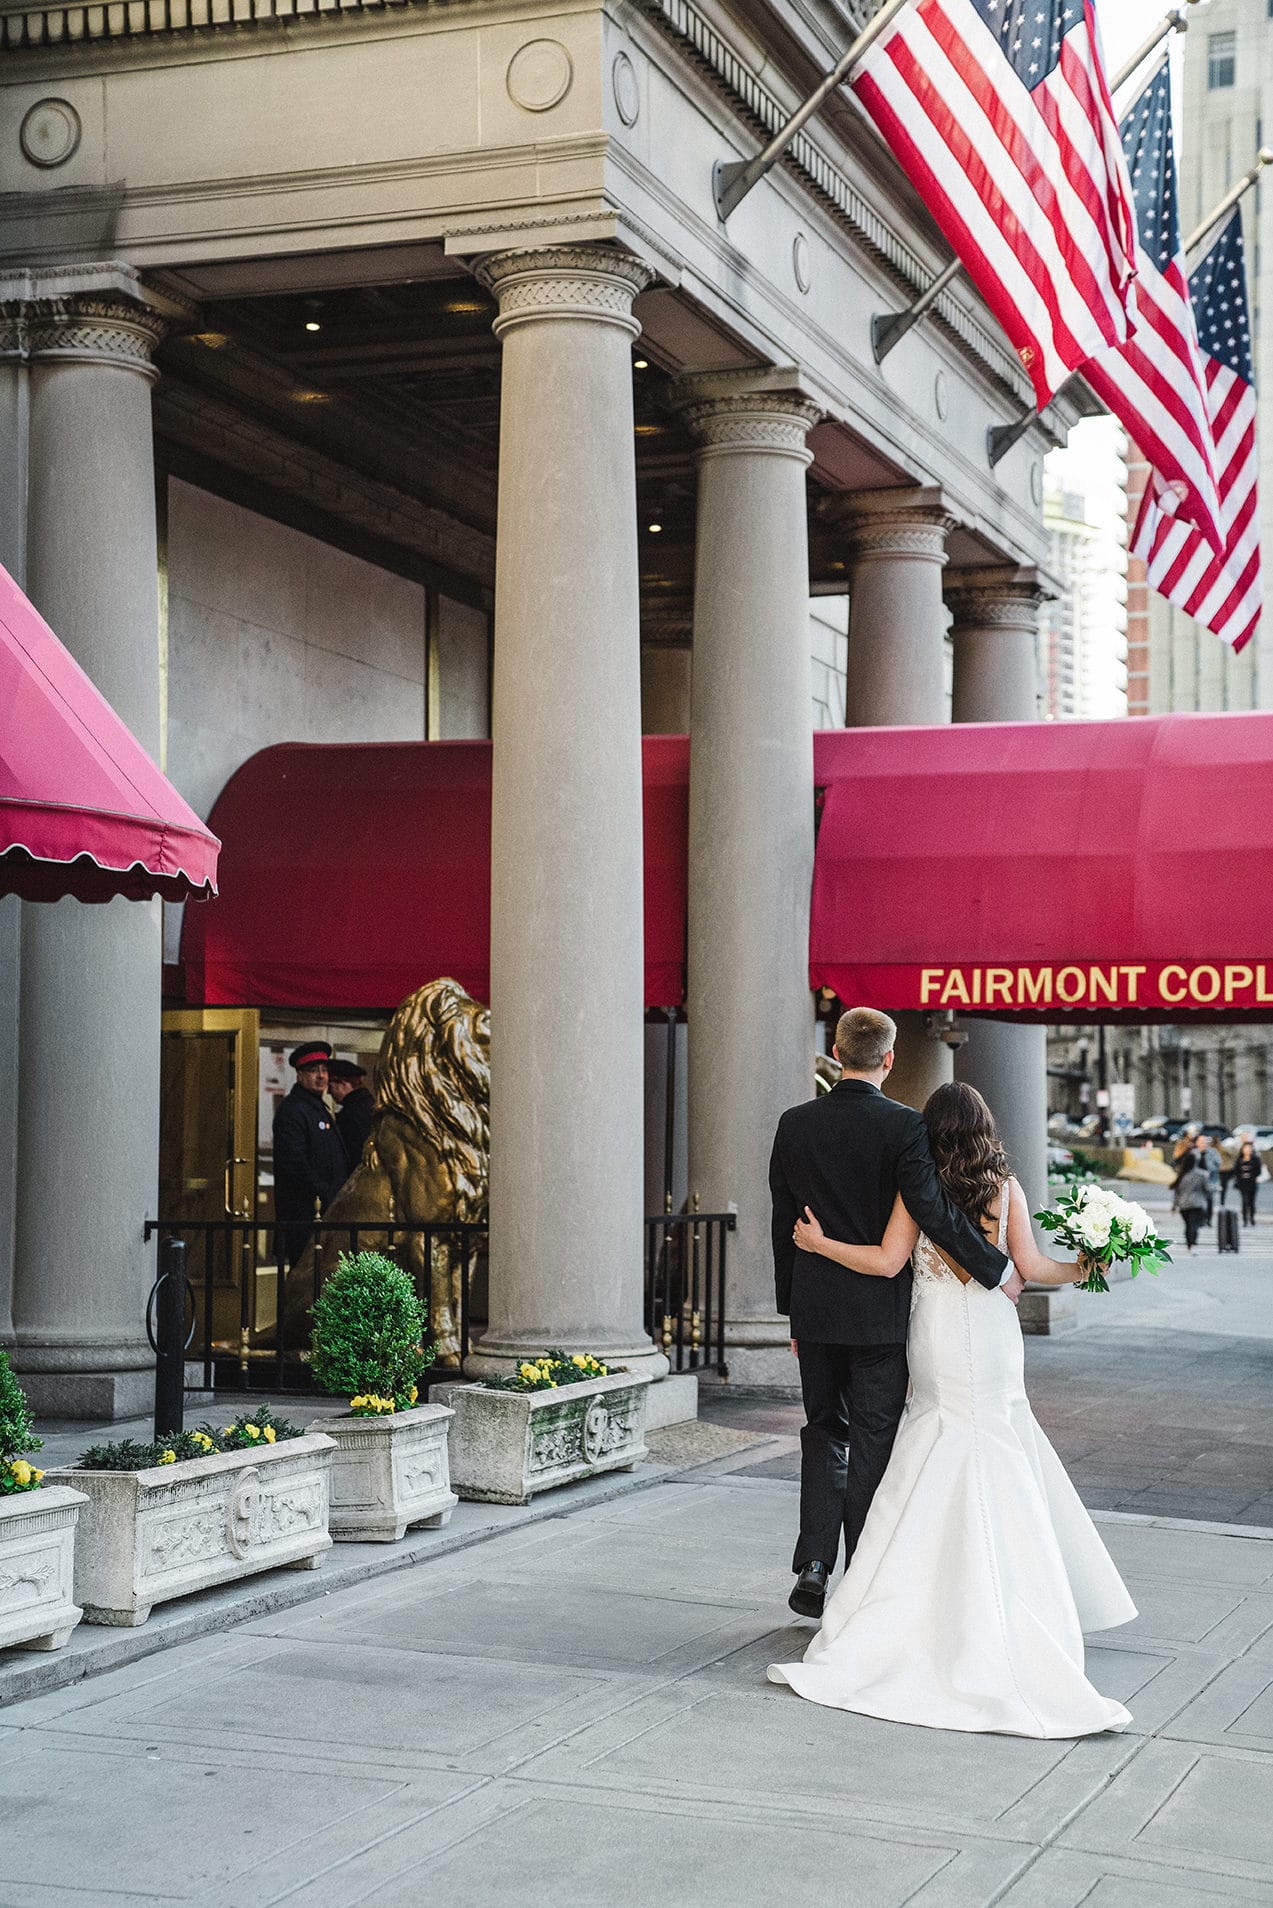 A candid portrait of a bride and groom walking into fairmont copley for their wedding reception